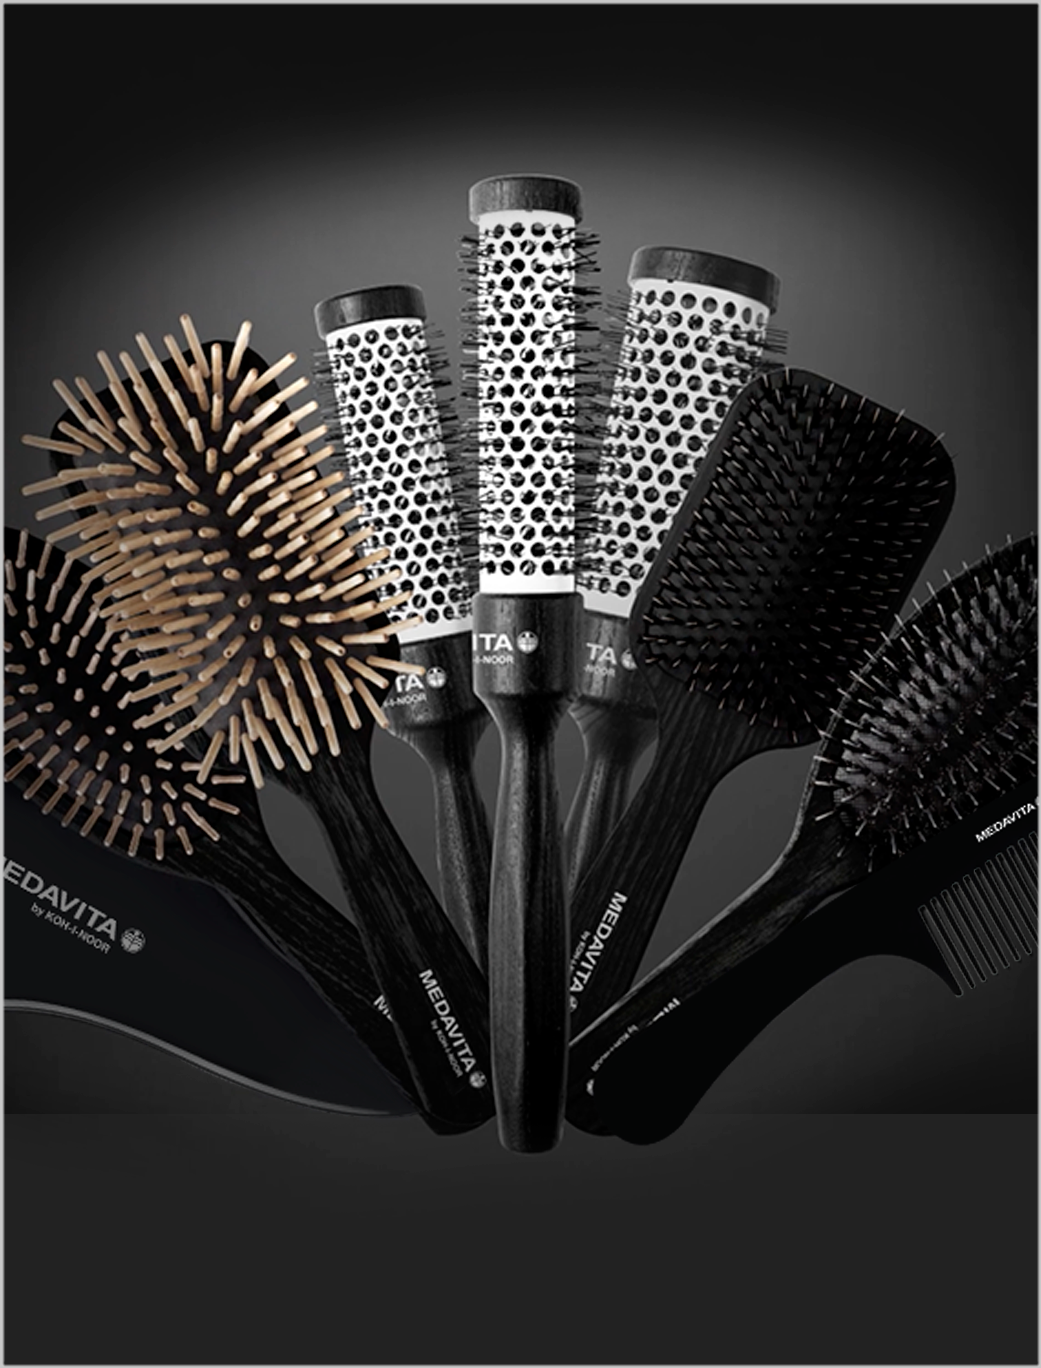 How to choose the right brush for your hair.